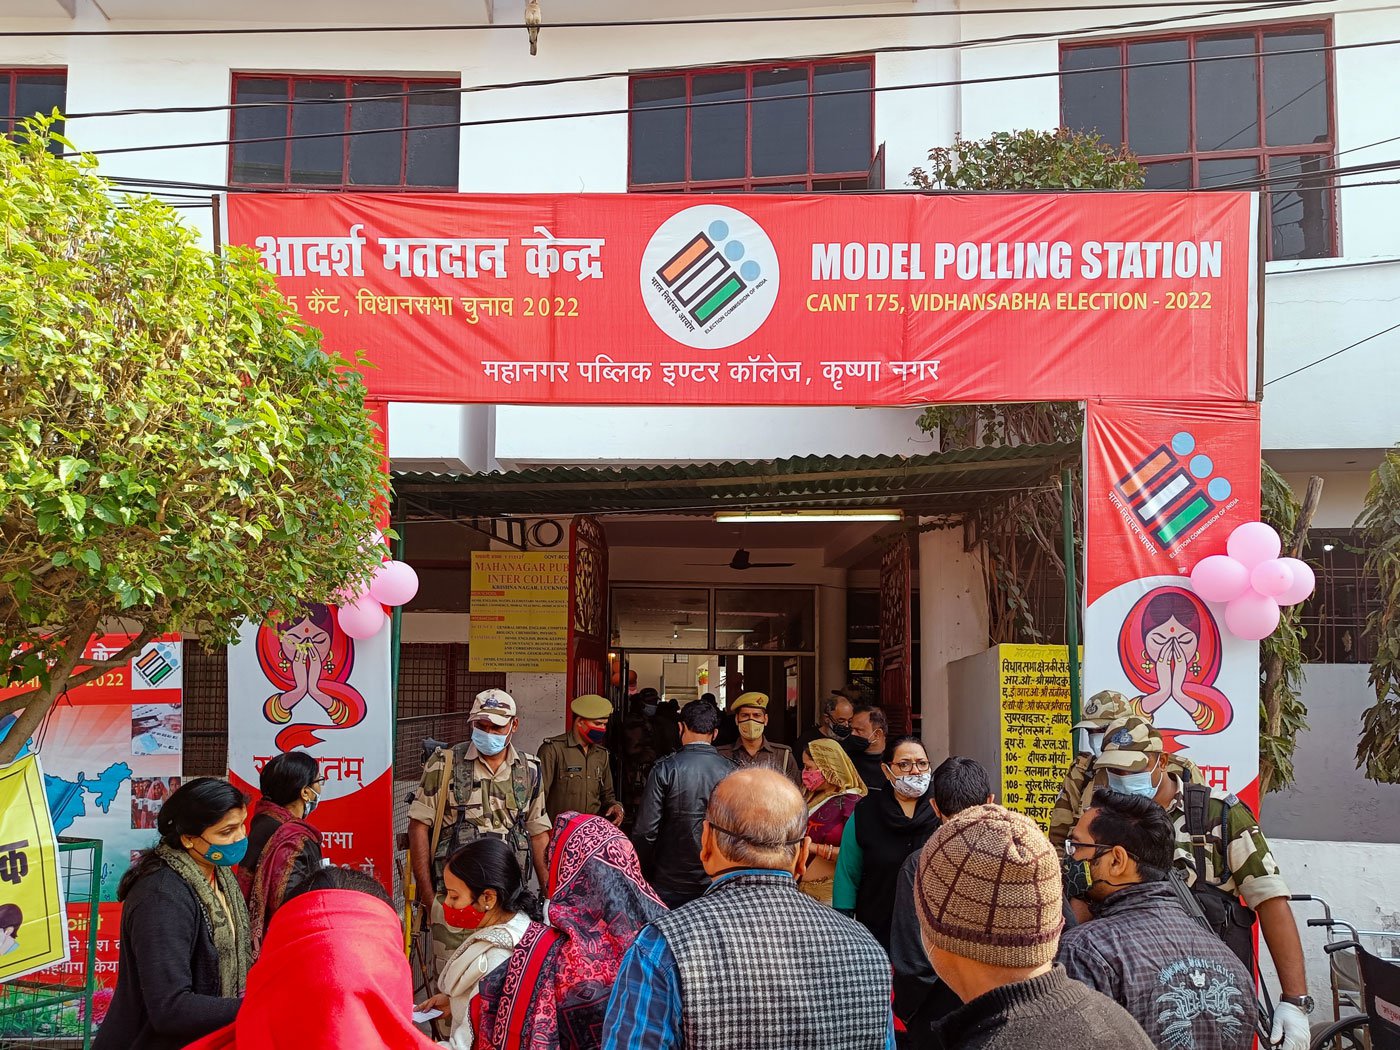 The Mahanagar Public Inter College polling station in Lucknow where Reeta Bajpai was posted to maintain sanitation and hygiene on election day. She worked for 10 hours that day